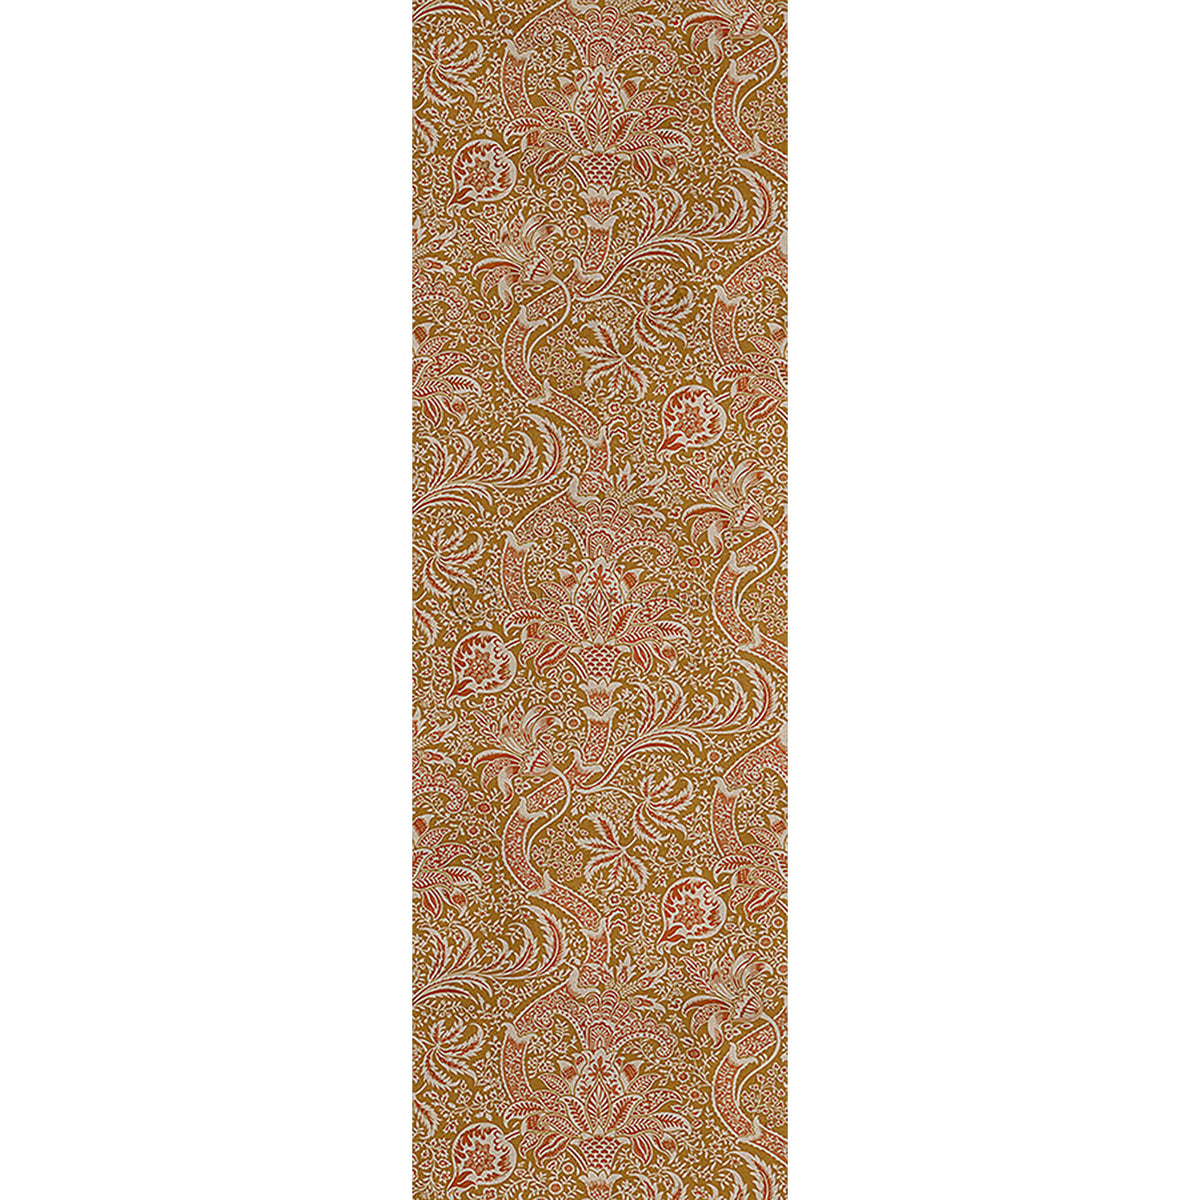 Indian Spice 36x115